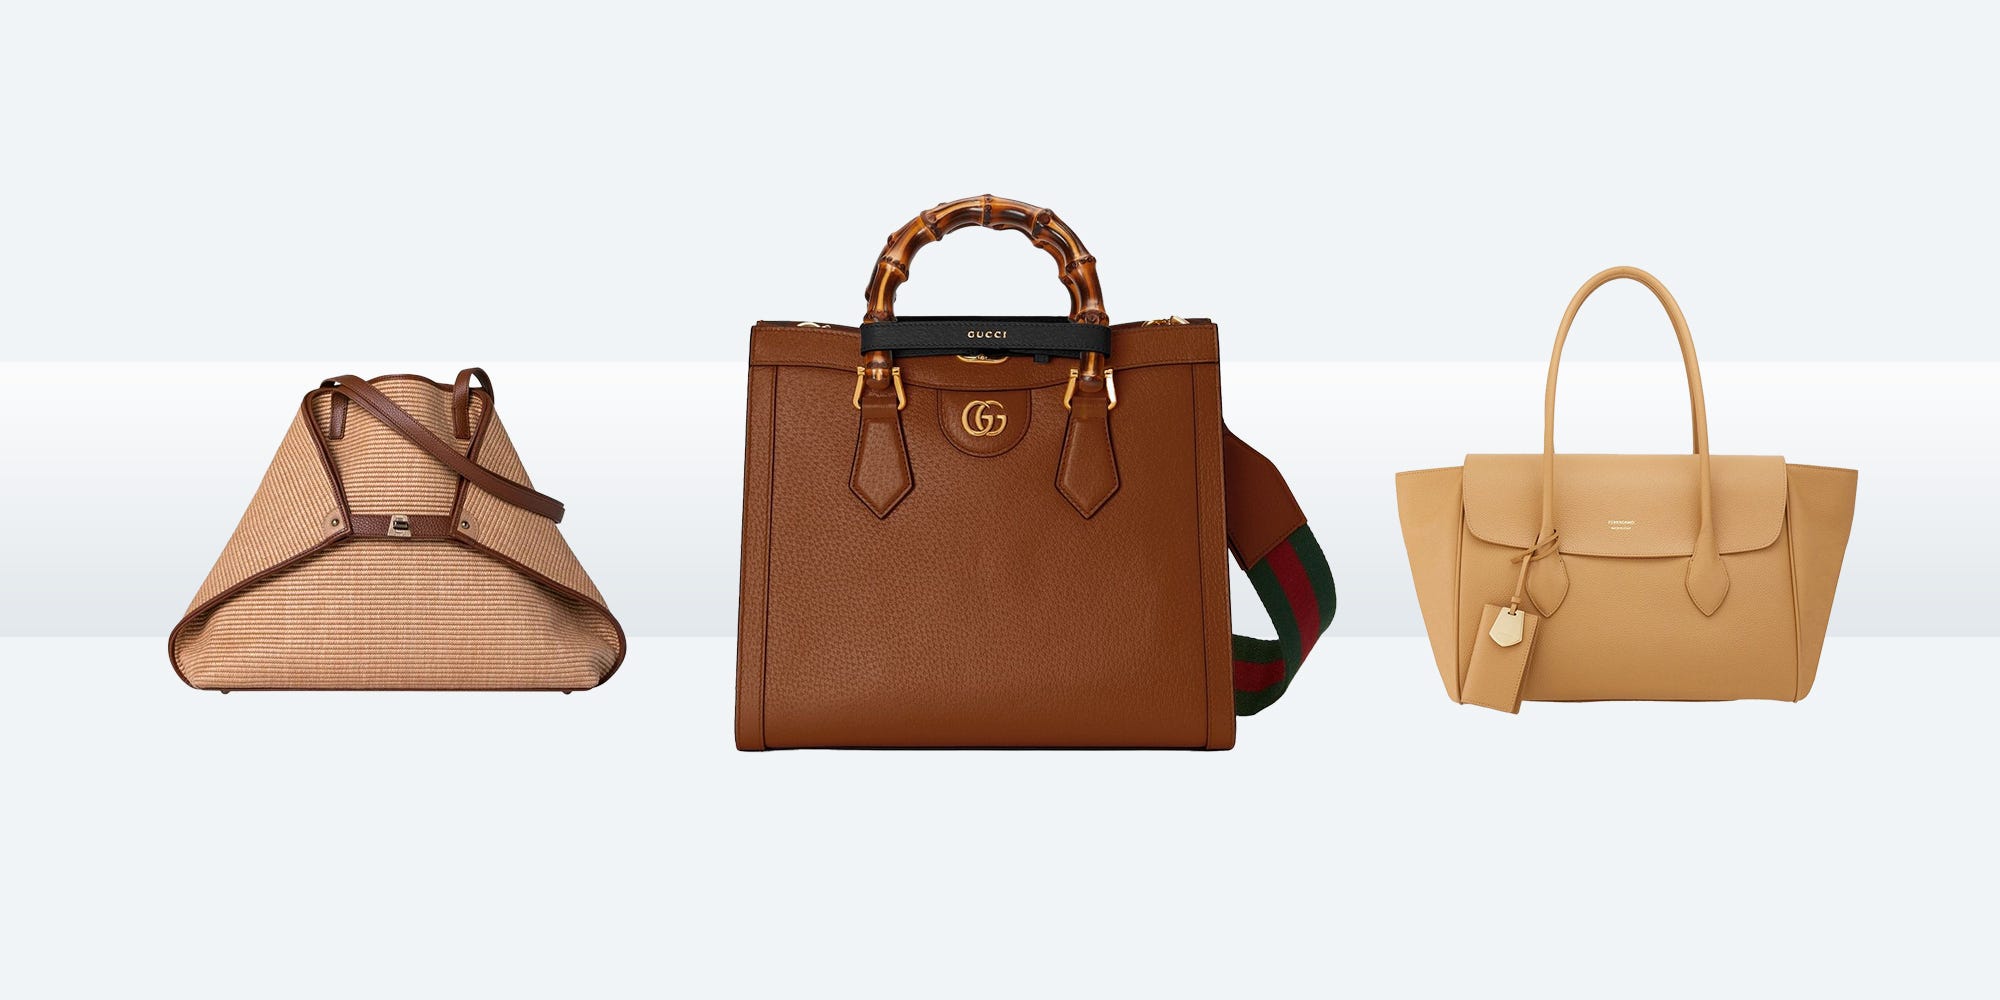 20 Iconic Designer Tote Bags That Stand the Test of Time